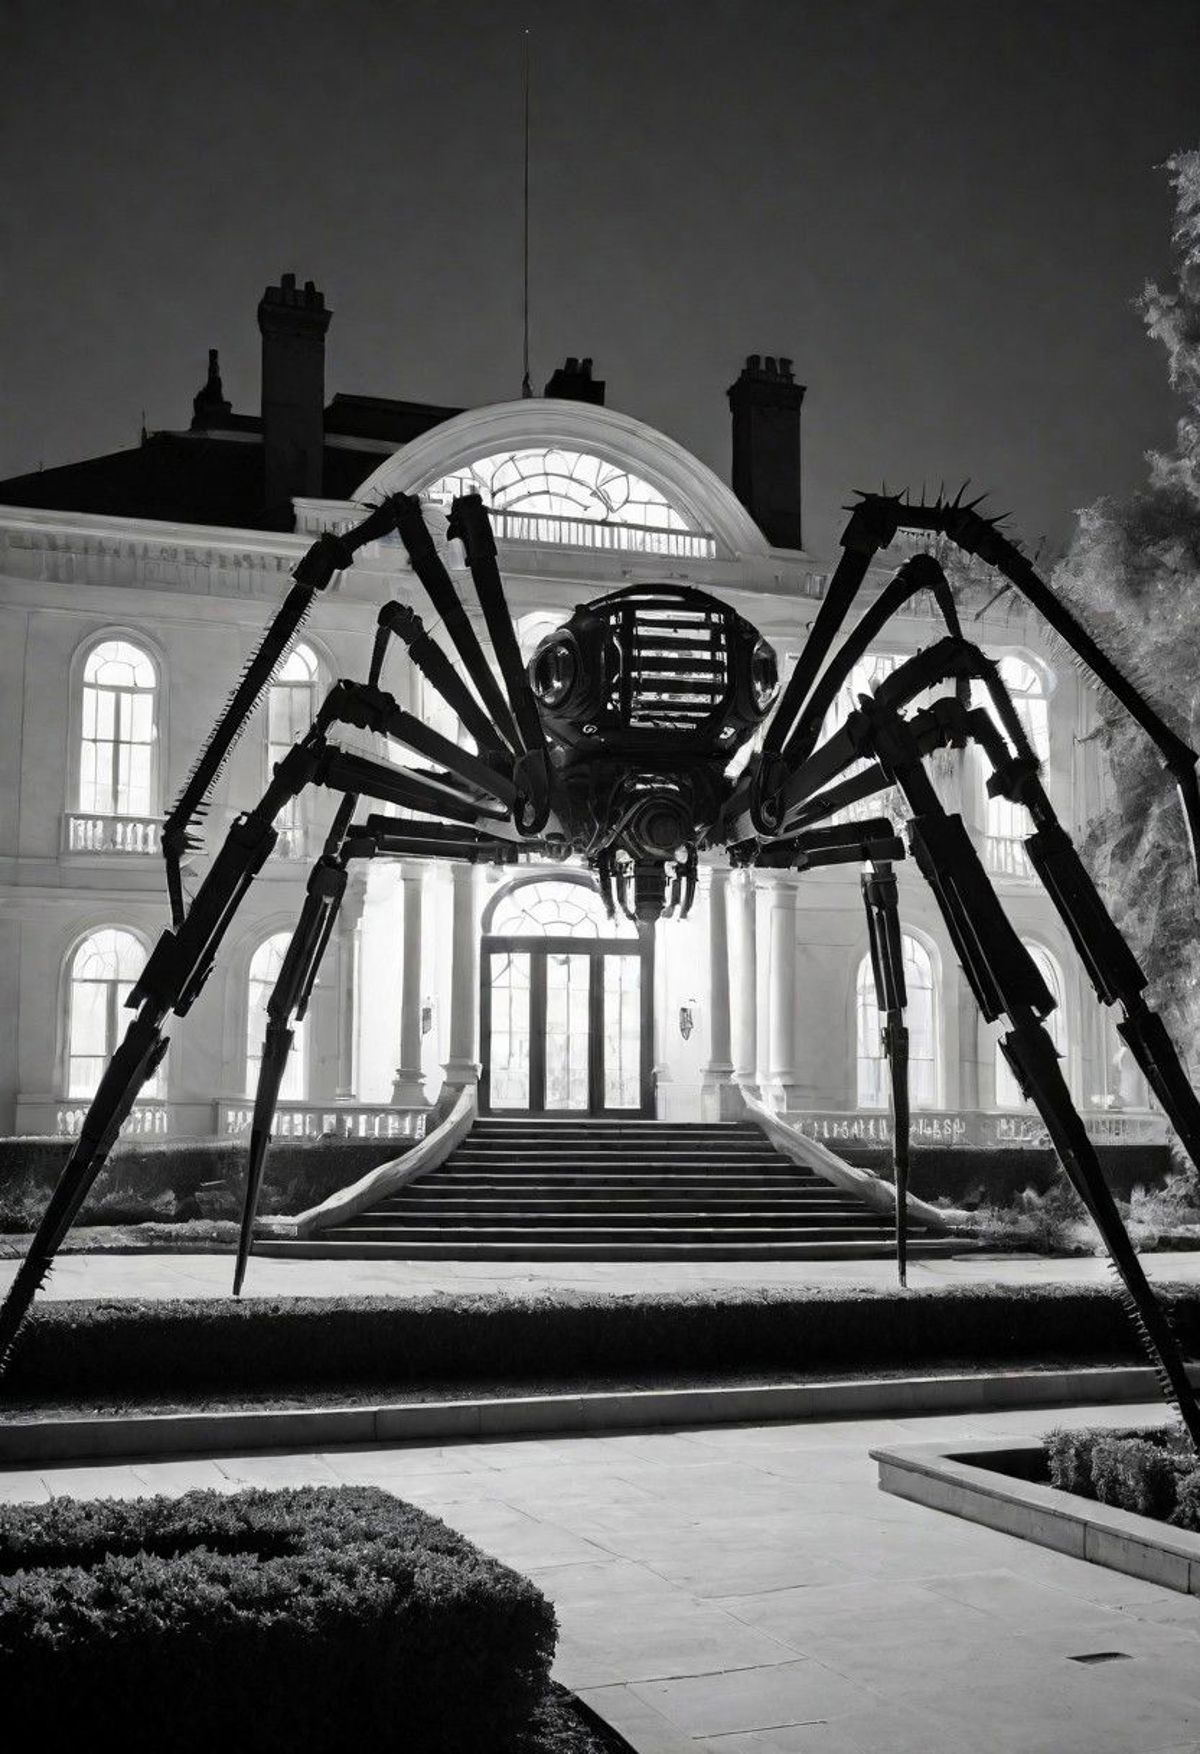 A giant spider sculpture in front of a building.